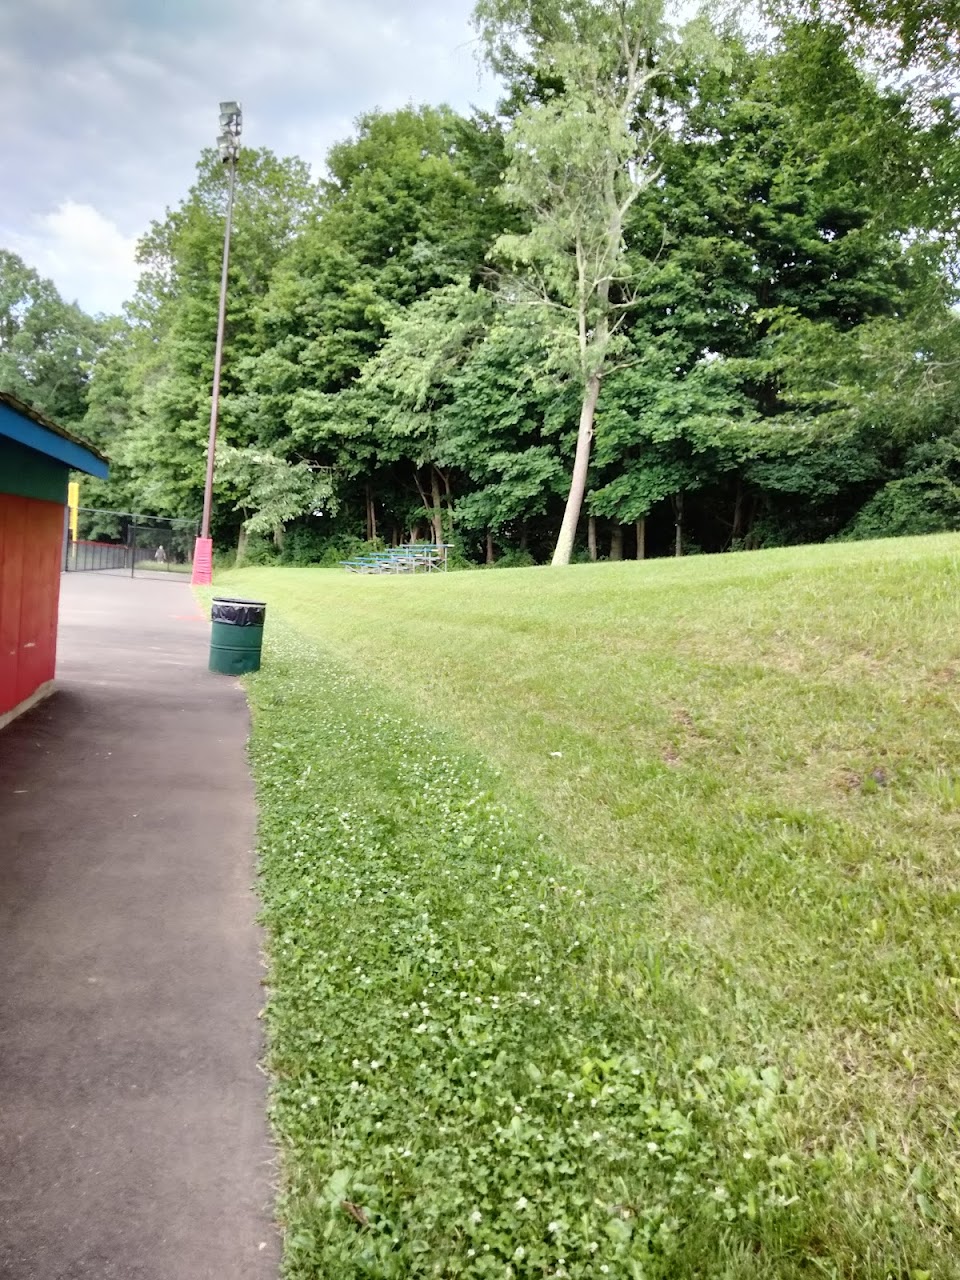 Photo of SAGE POND PLACE. Affordable housing located at 1725 BERLIN TPKE BERLIN, CT 06037